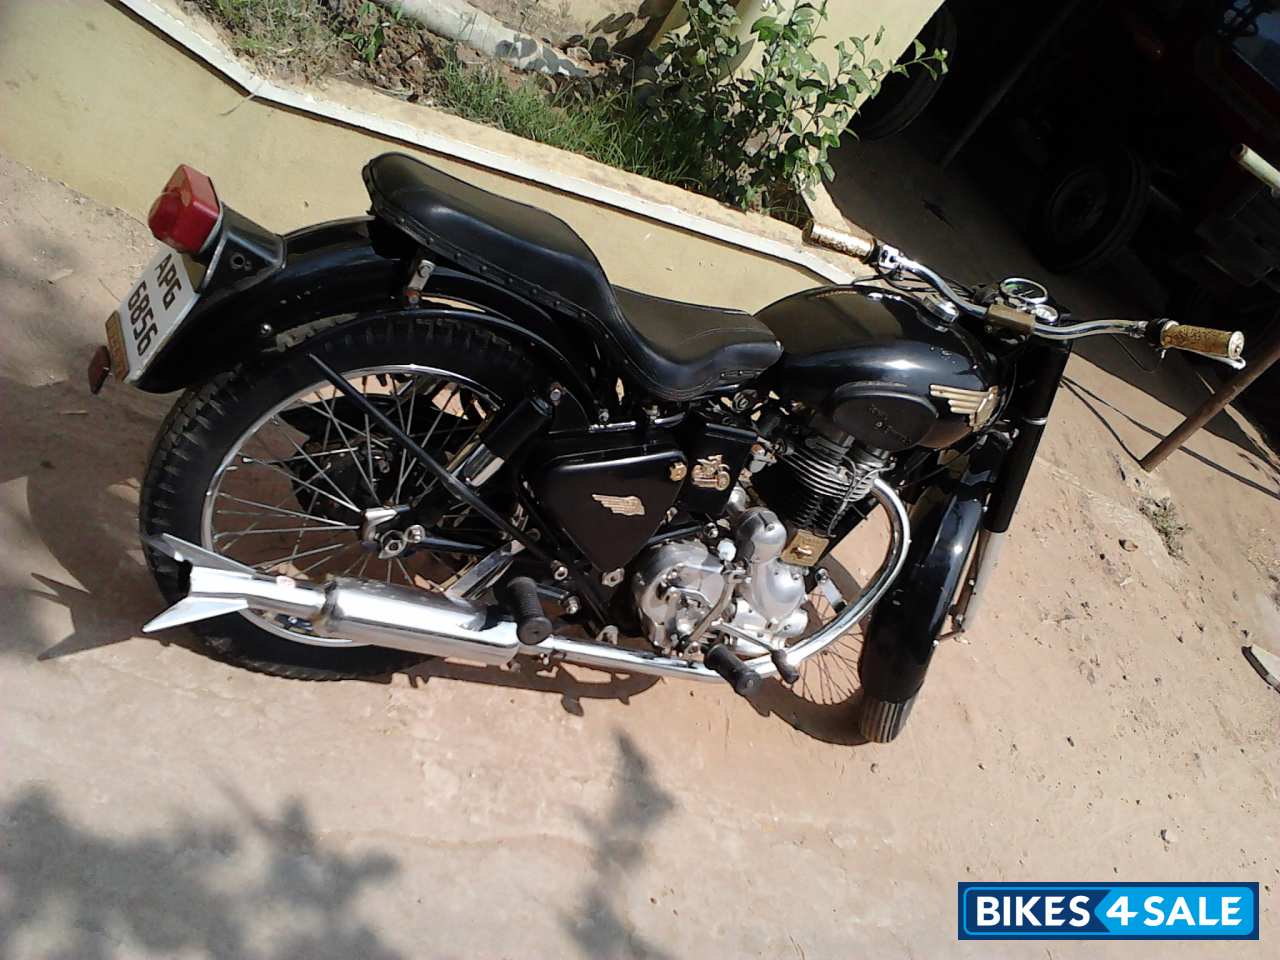 used royal enfield for sale near me